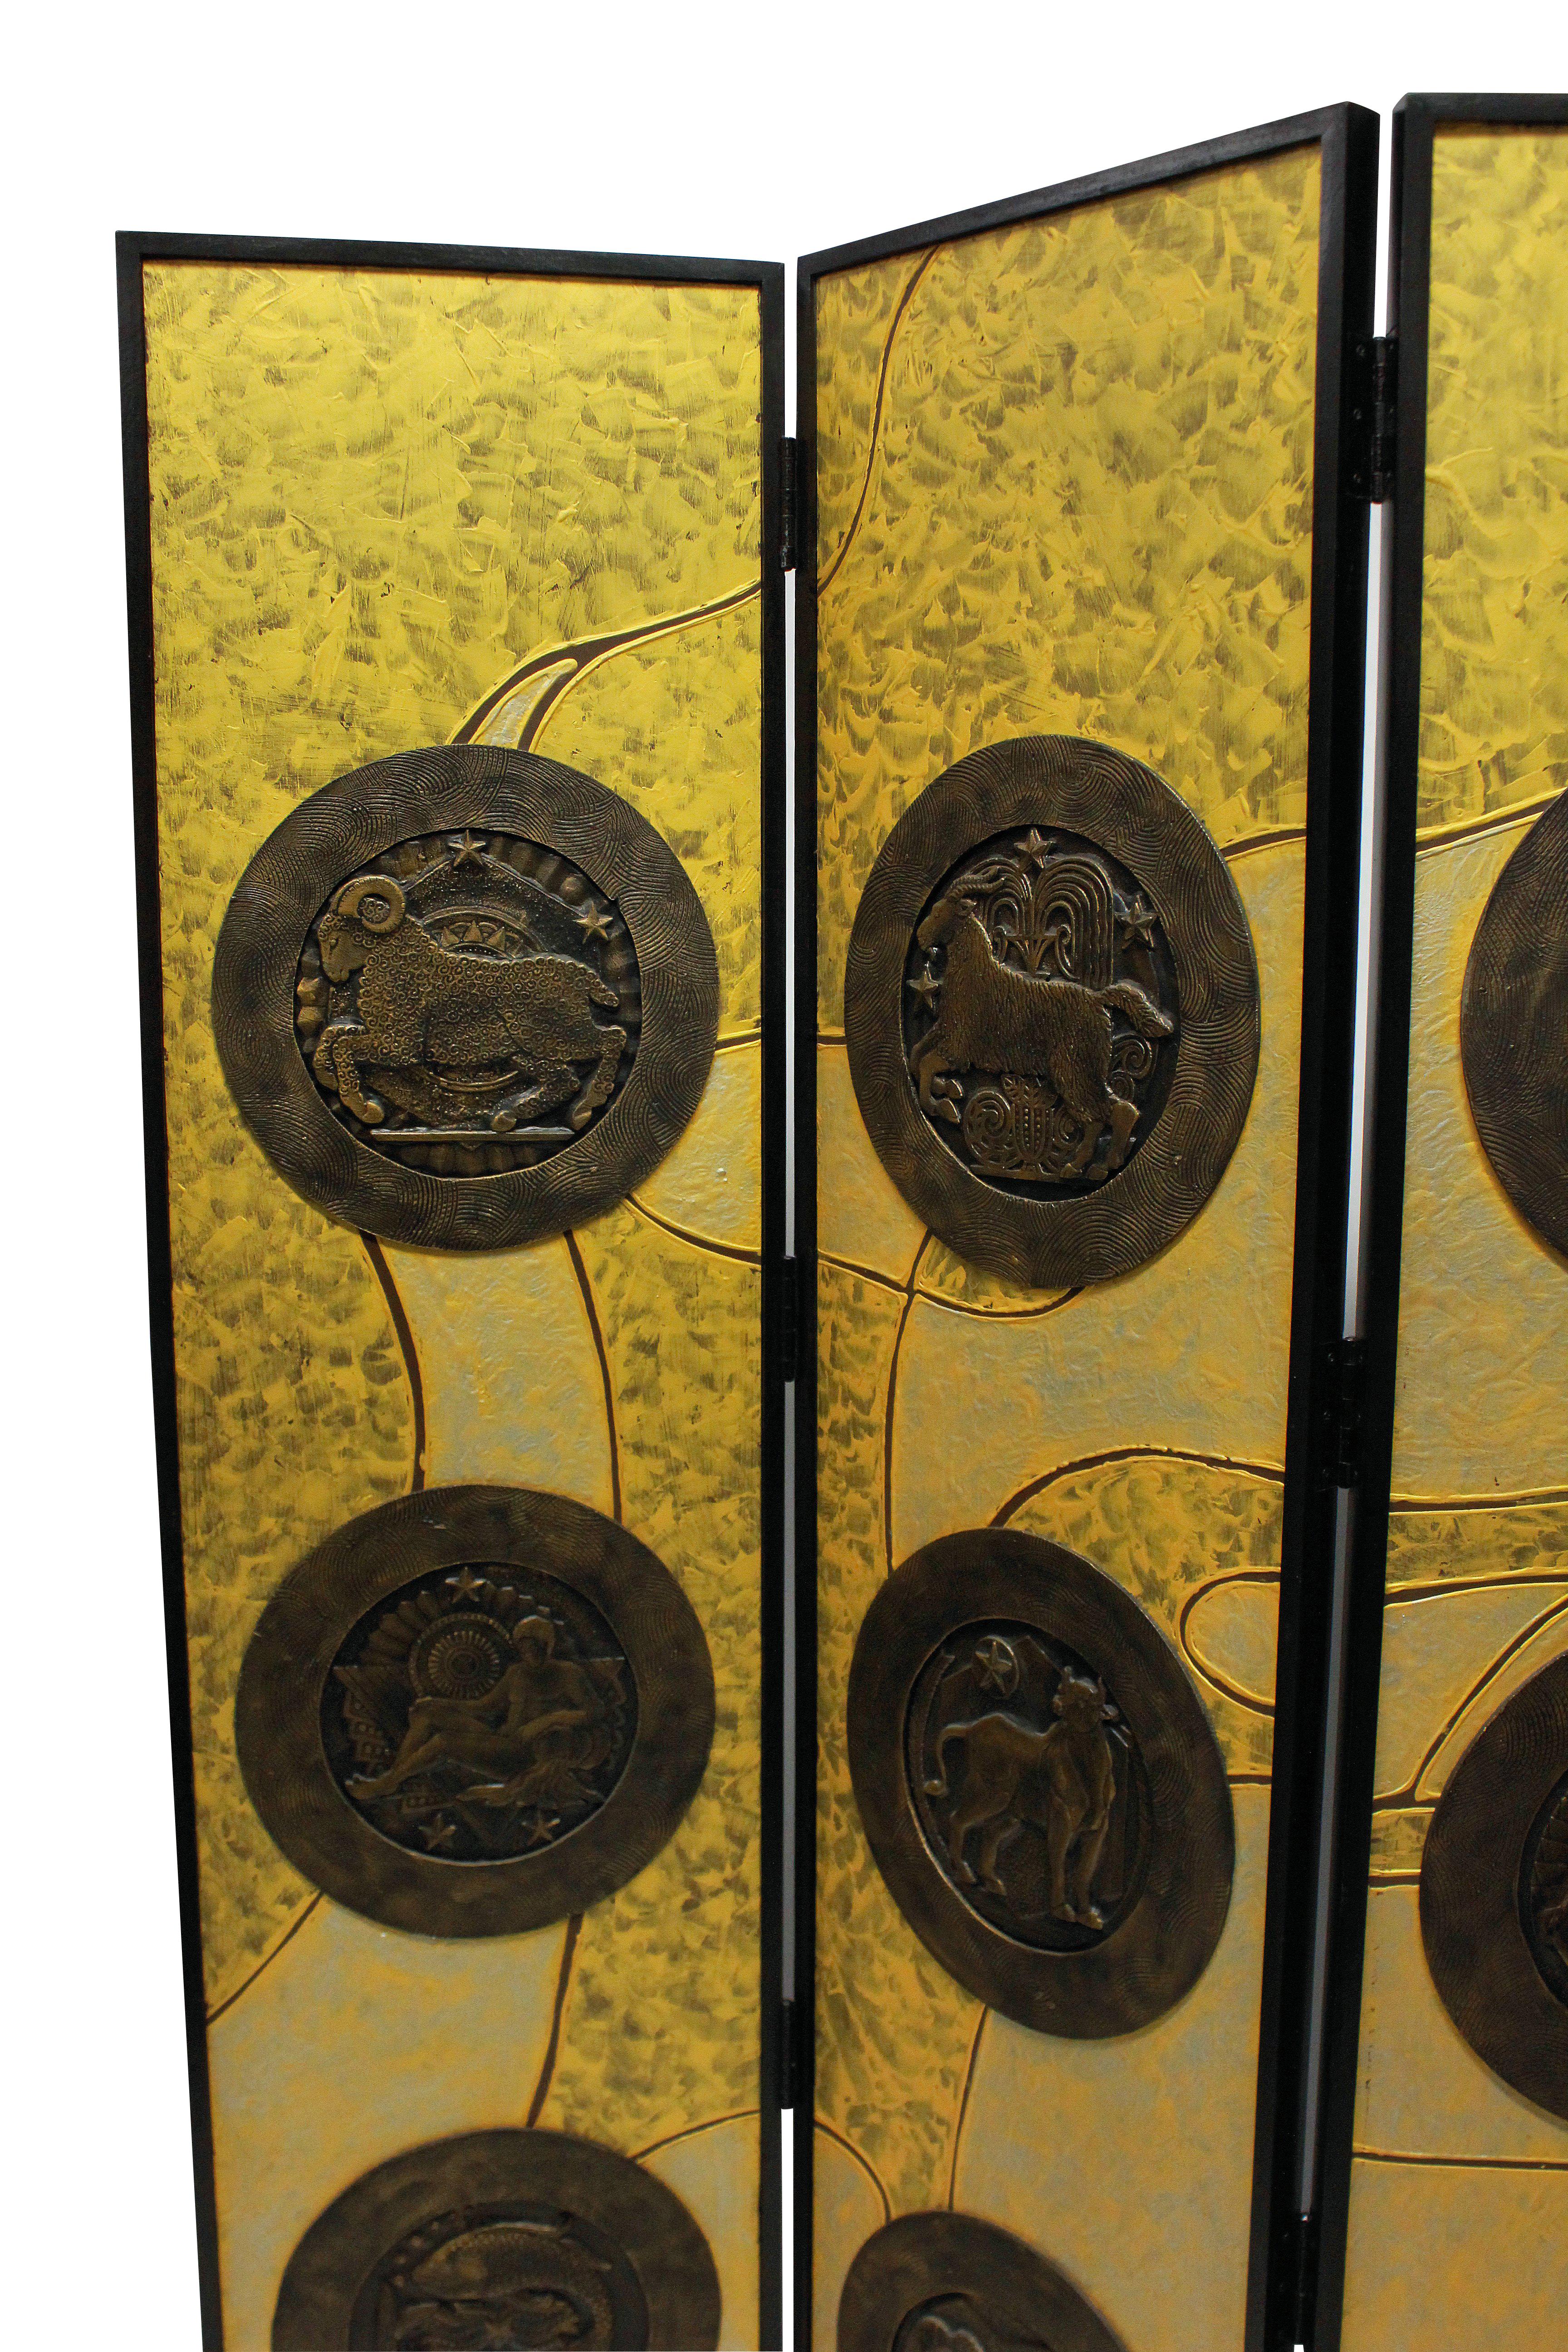 An Italian hand painted four-fold screen in the manner of Fornasetti, with a gold and yellow back ground supporting bronzed medallions of the zodiac symbols. Set in a hardwood ebonized frame, it is very heavy and sturdy.